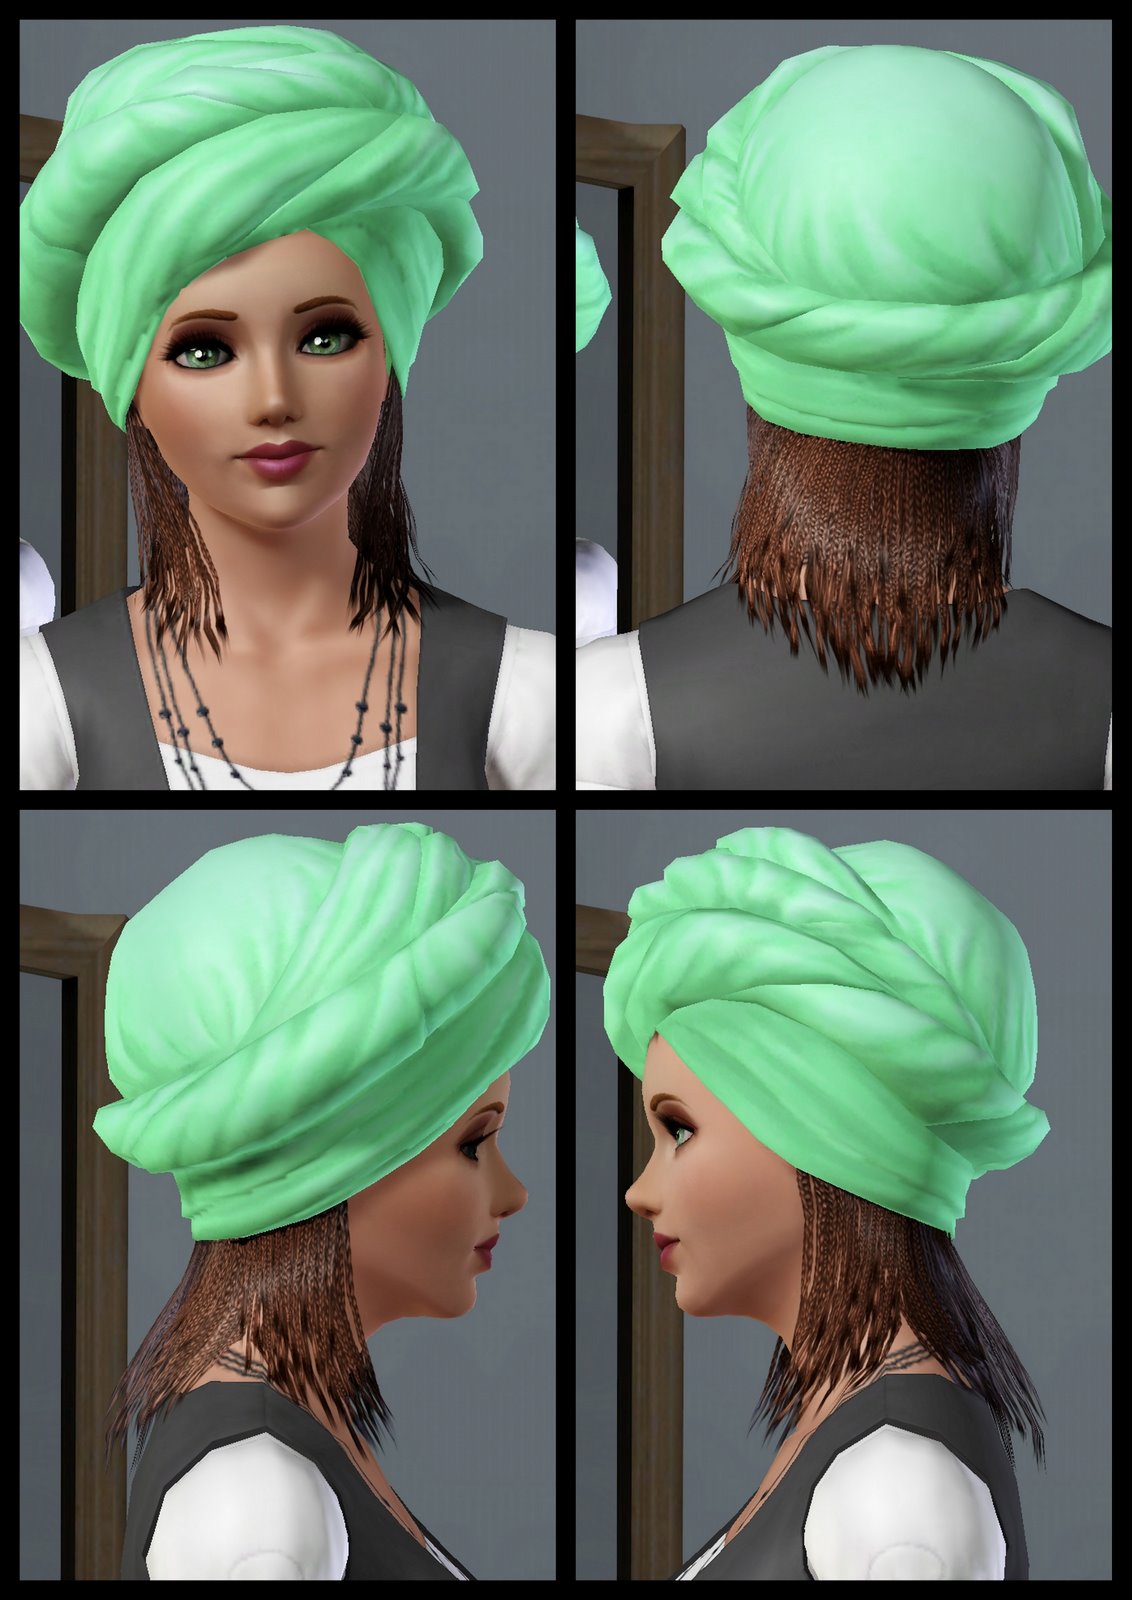 The Sims 3 Store: Hair Showroom: Africa Inspiration: Scarf 